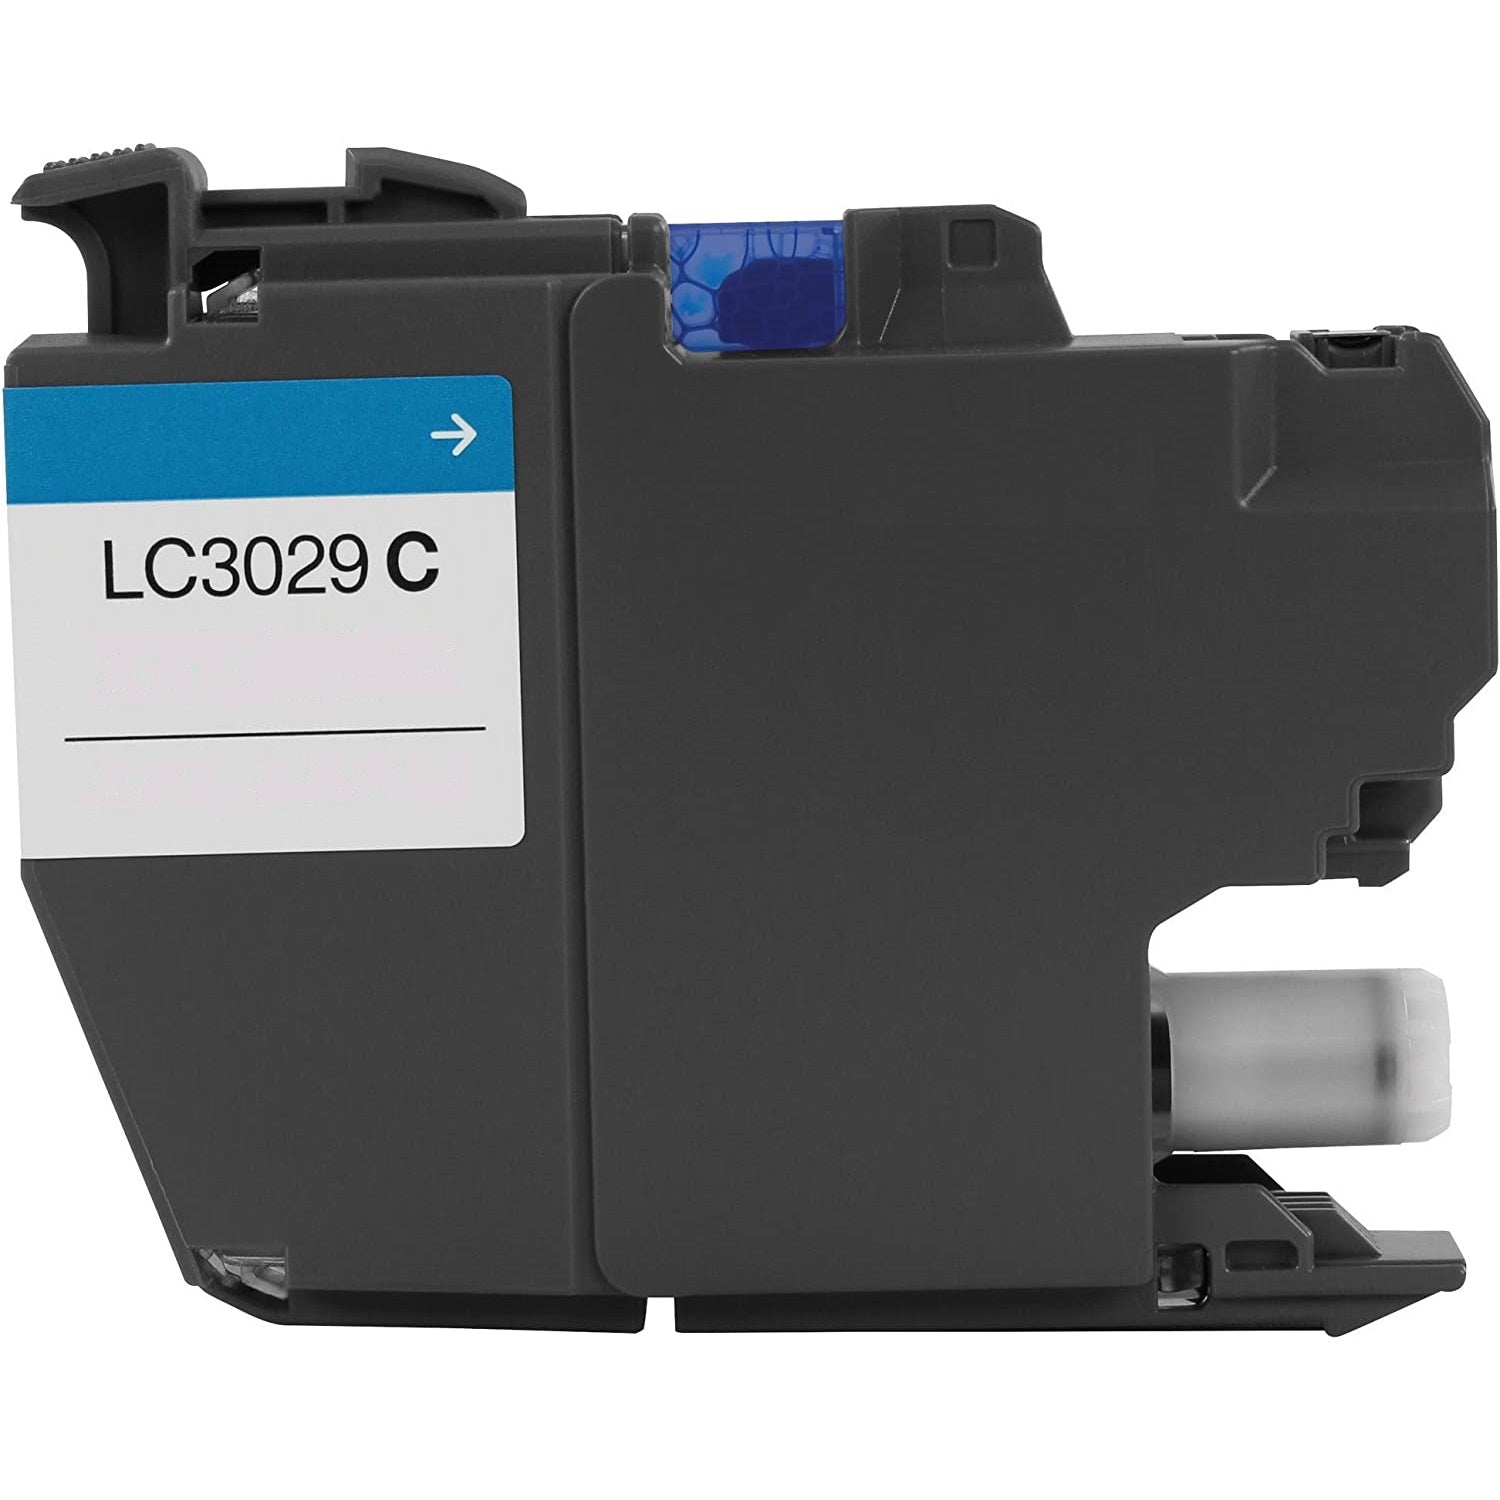 Absolute Toner Brother LC3029 Cyan Compatible Ink Cartridge (LC3029CS), Super High Yield Brother Ink Cartridges